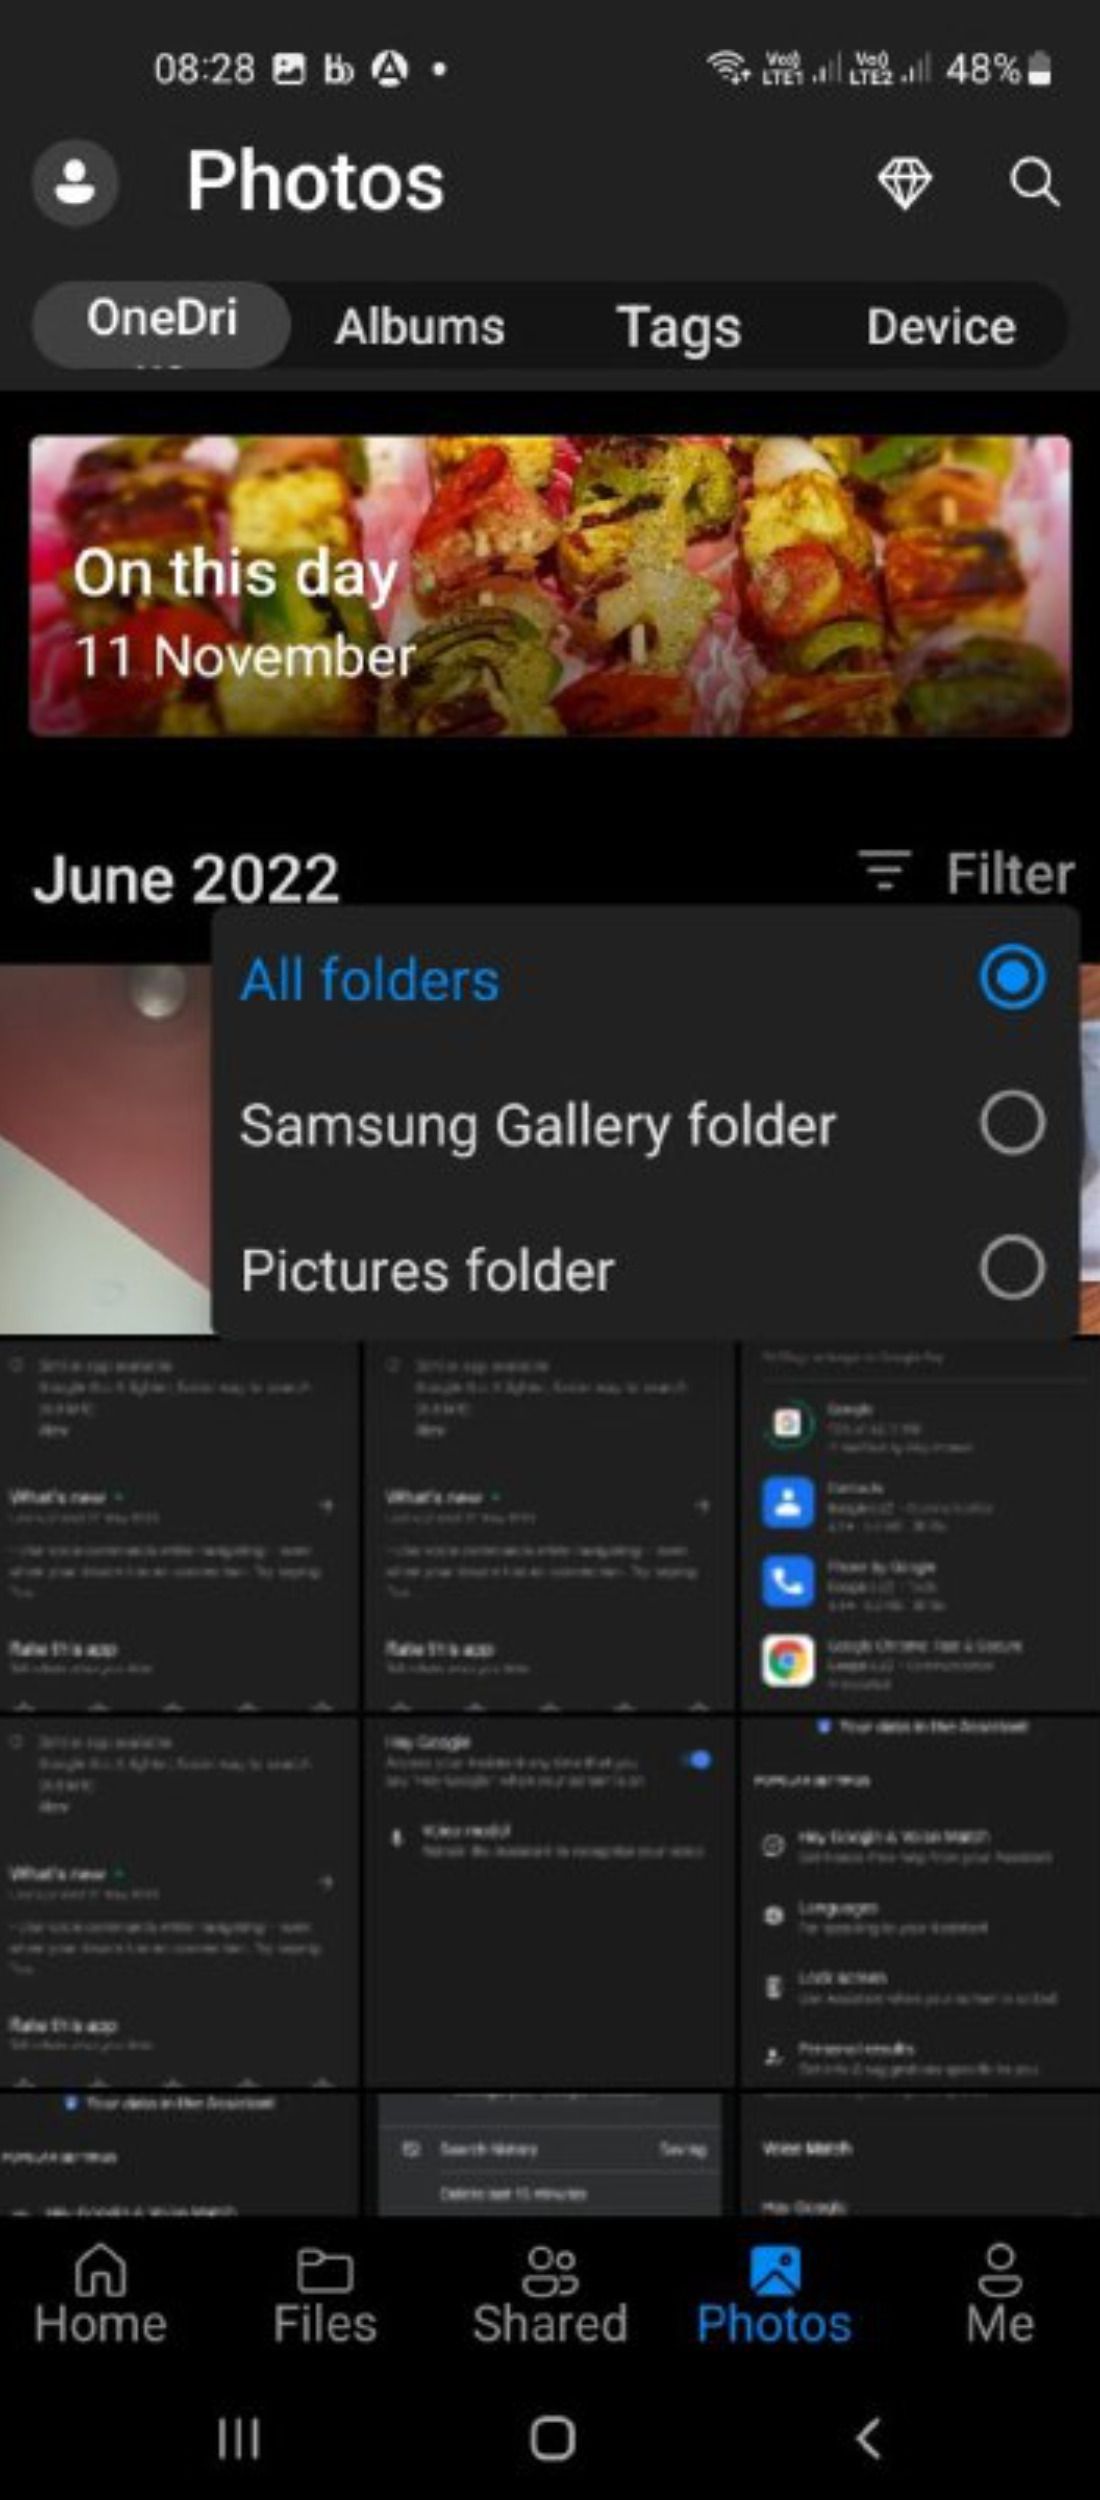 Filter pictures in Samsung gallery folder